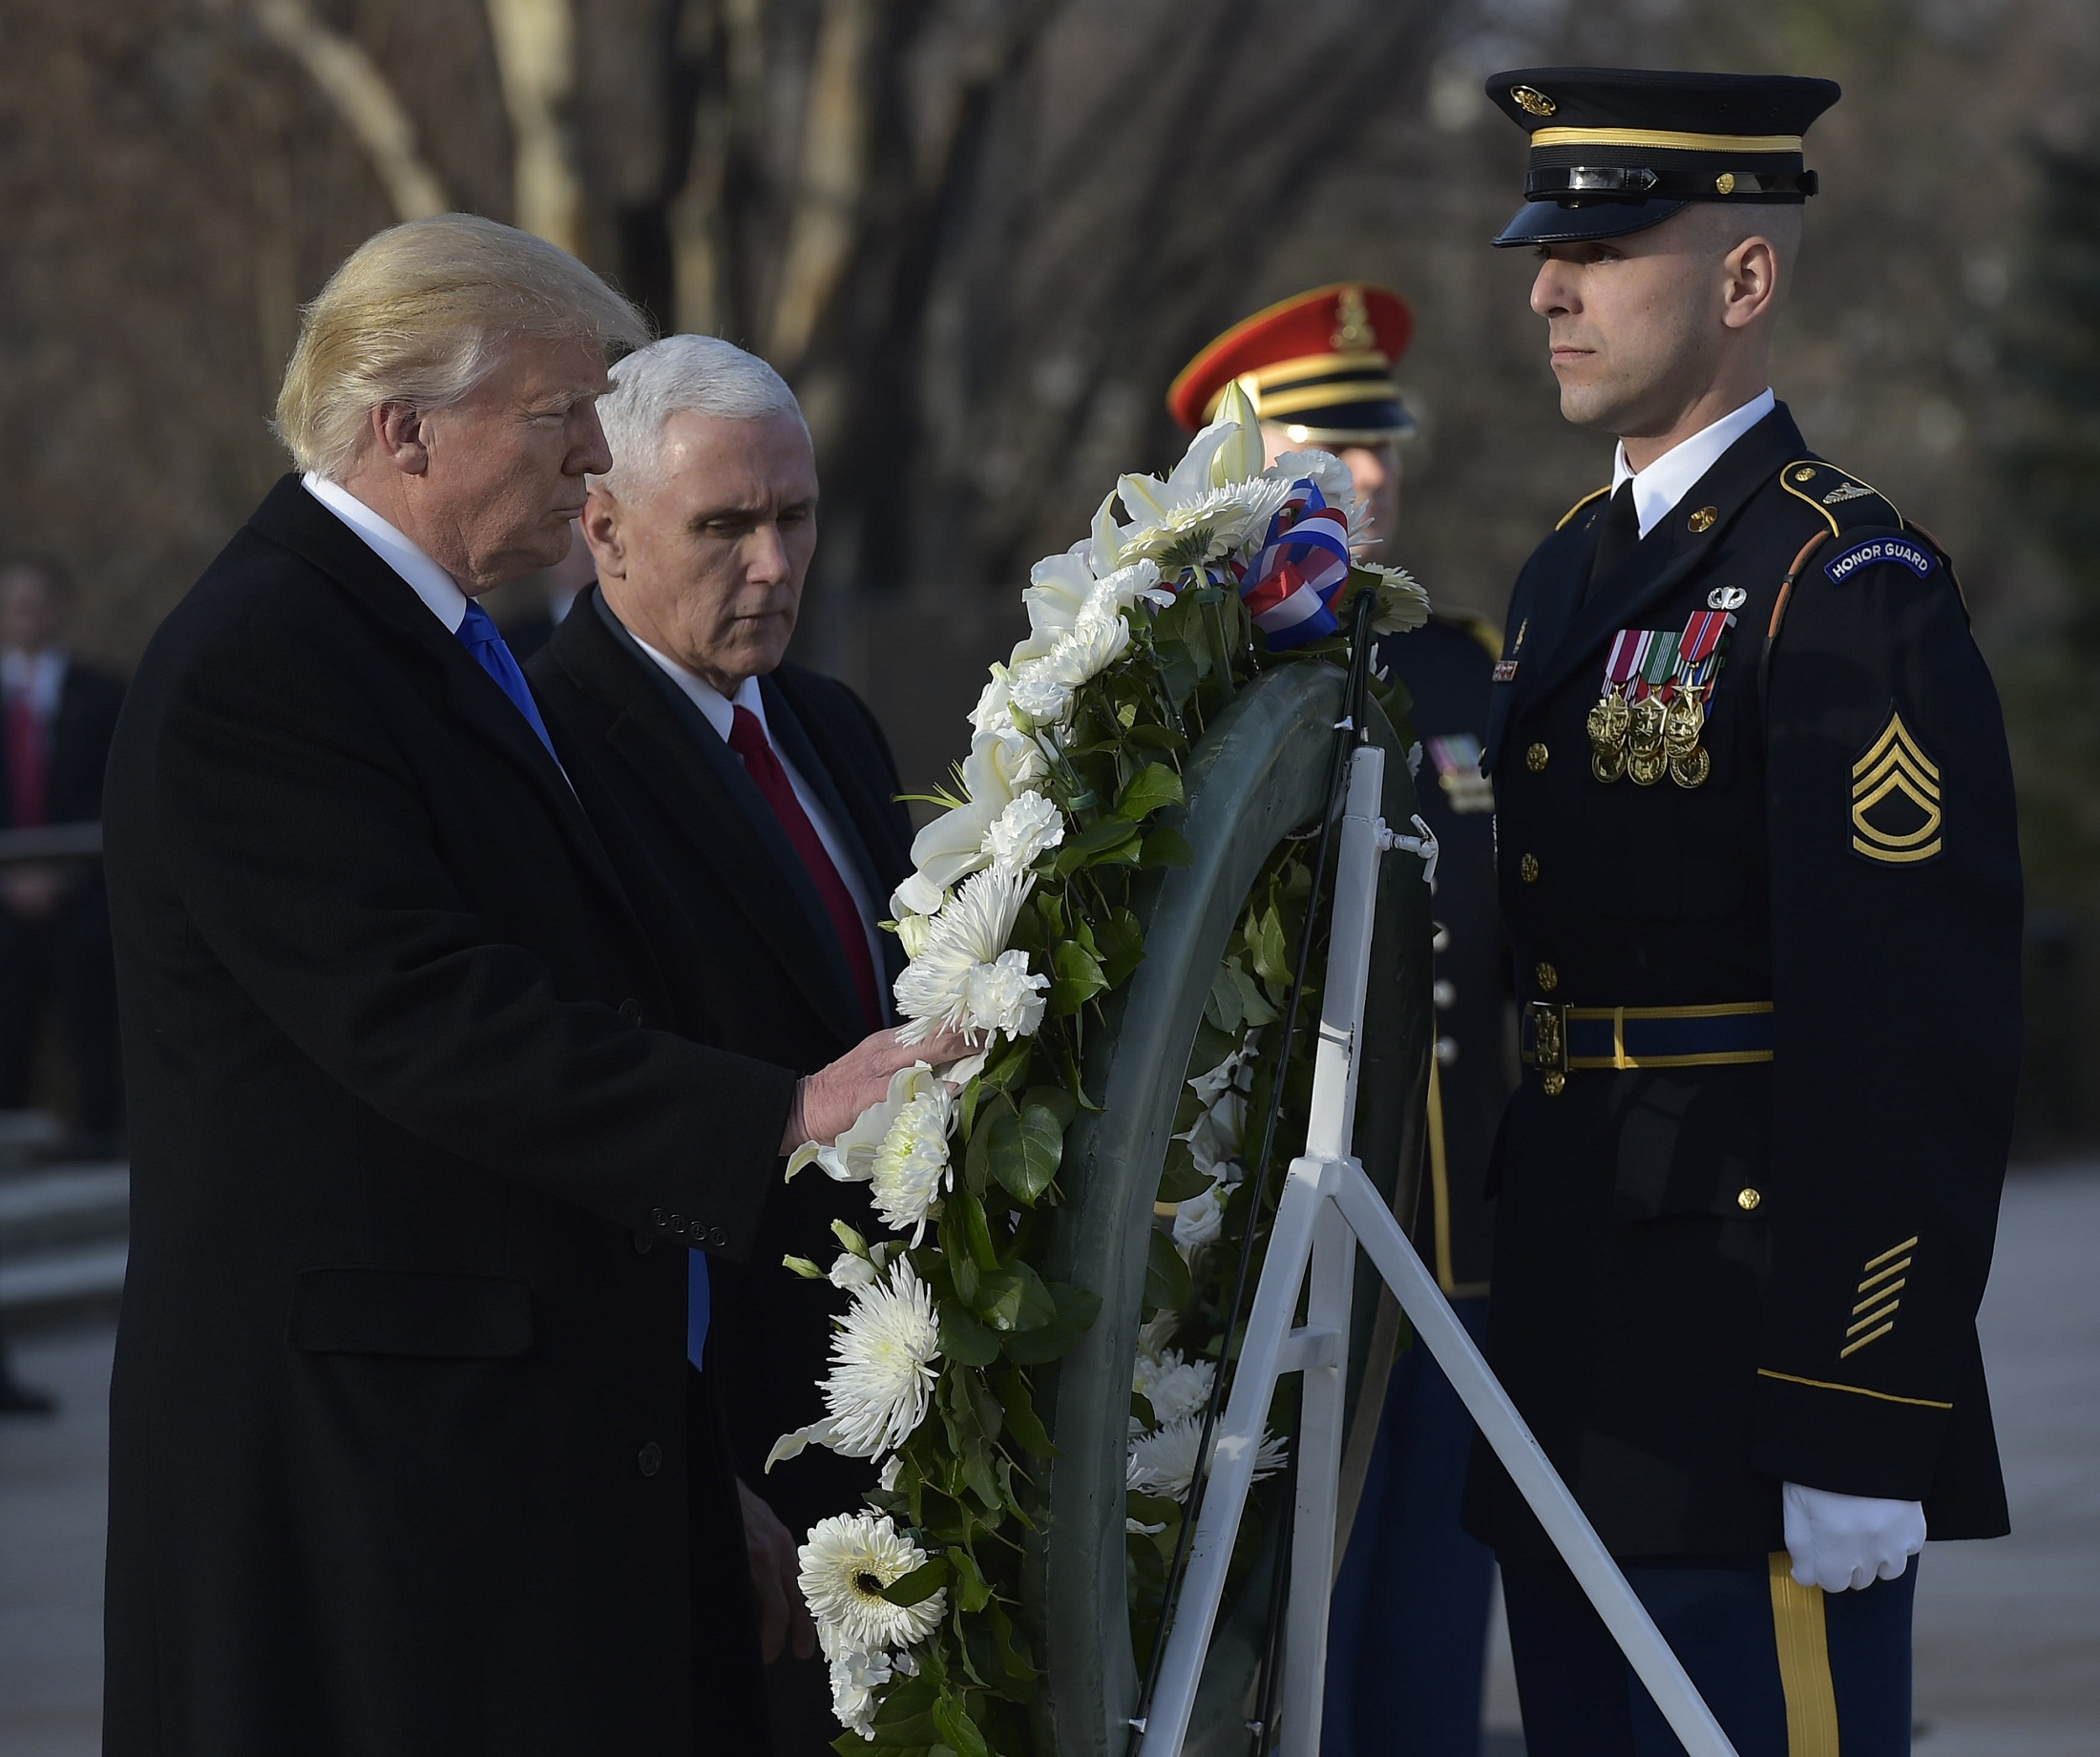 US President-elect Donald Trump and Vice President-elect Mike Pence take part in a wreath-laying ceremony at Arlington National Cemetery in Arlington,Virginia, on January 19, 2017. / AFP PHOTO / MANDEL NGAN